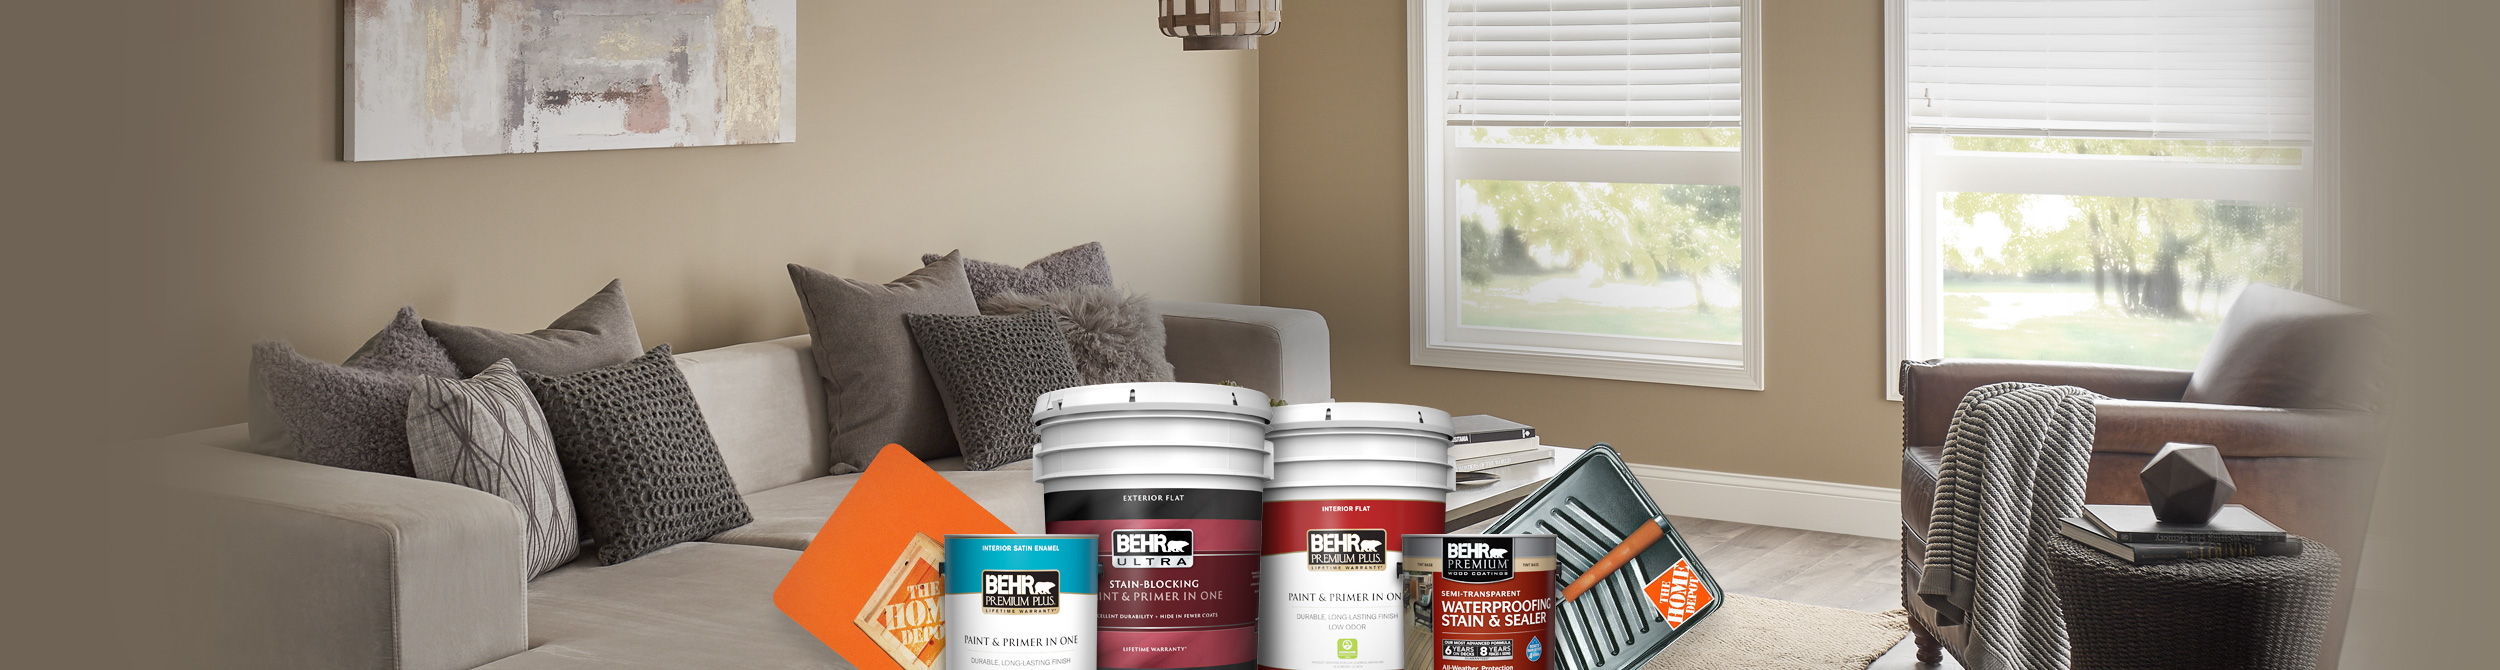 Living room image with montage of Behr products overlaid on top.